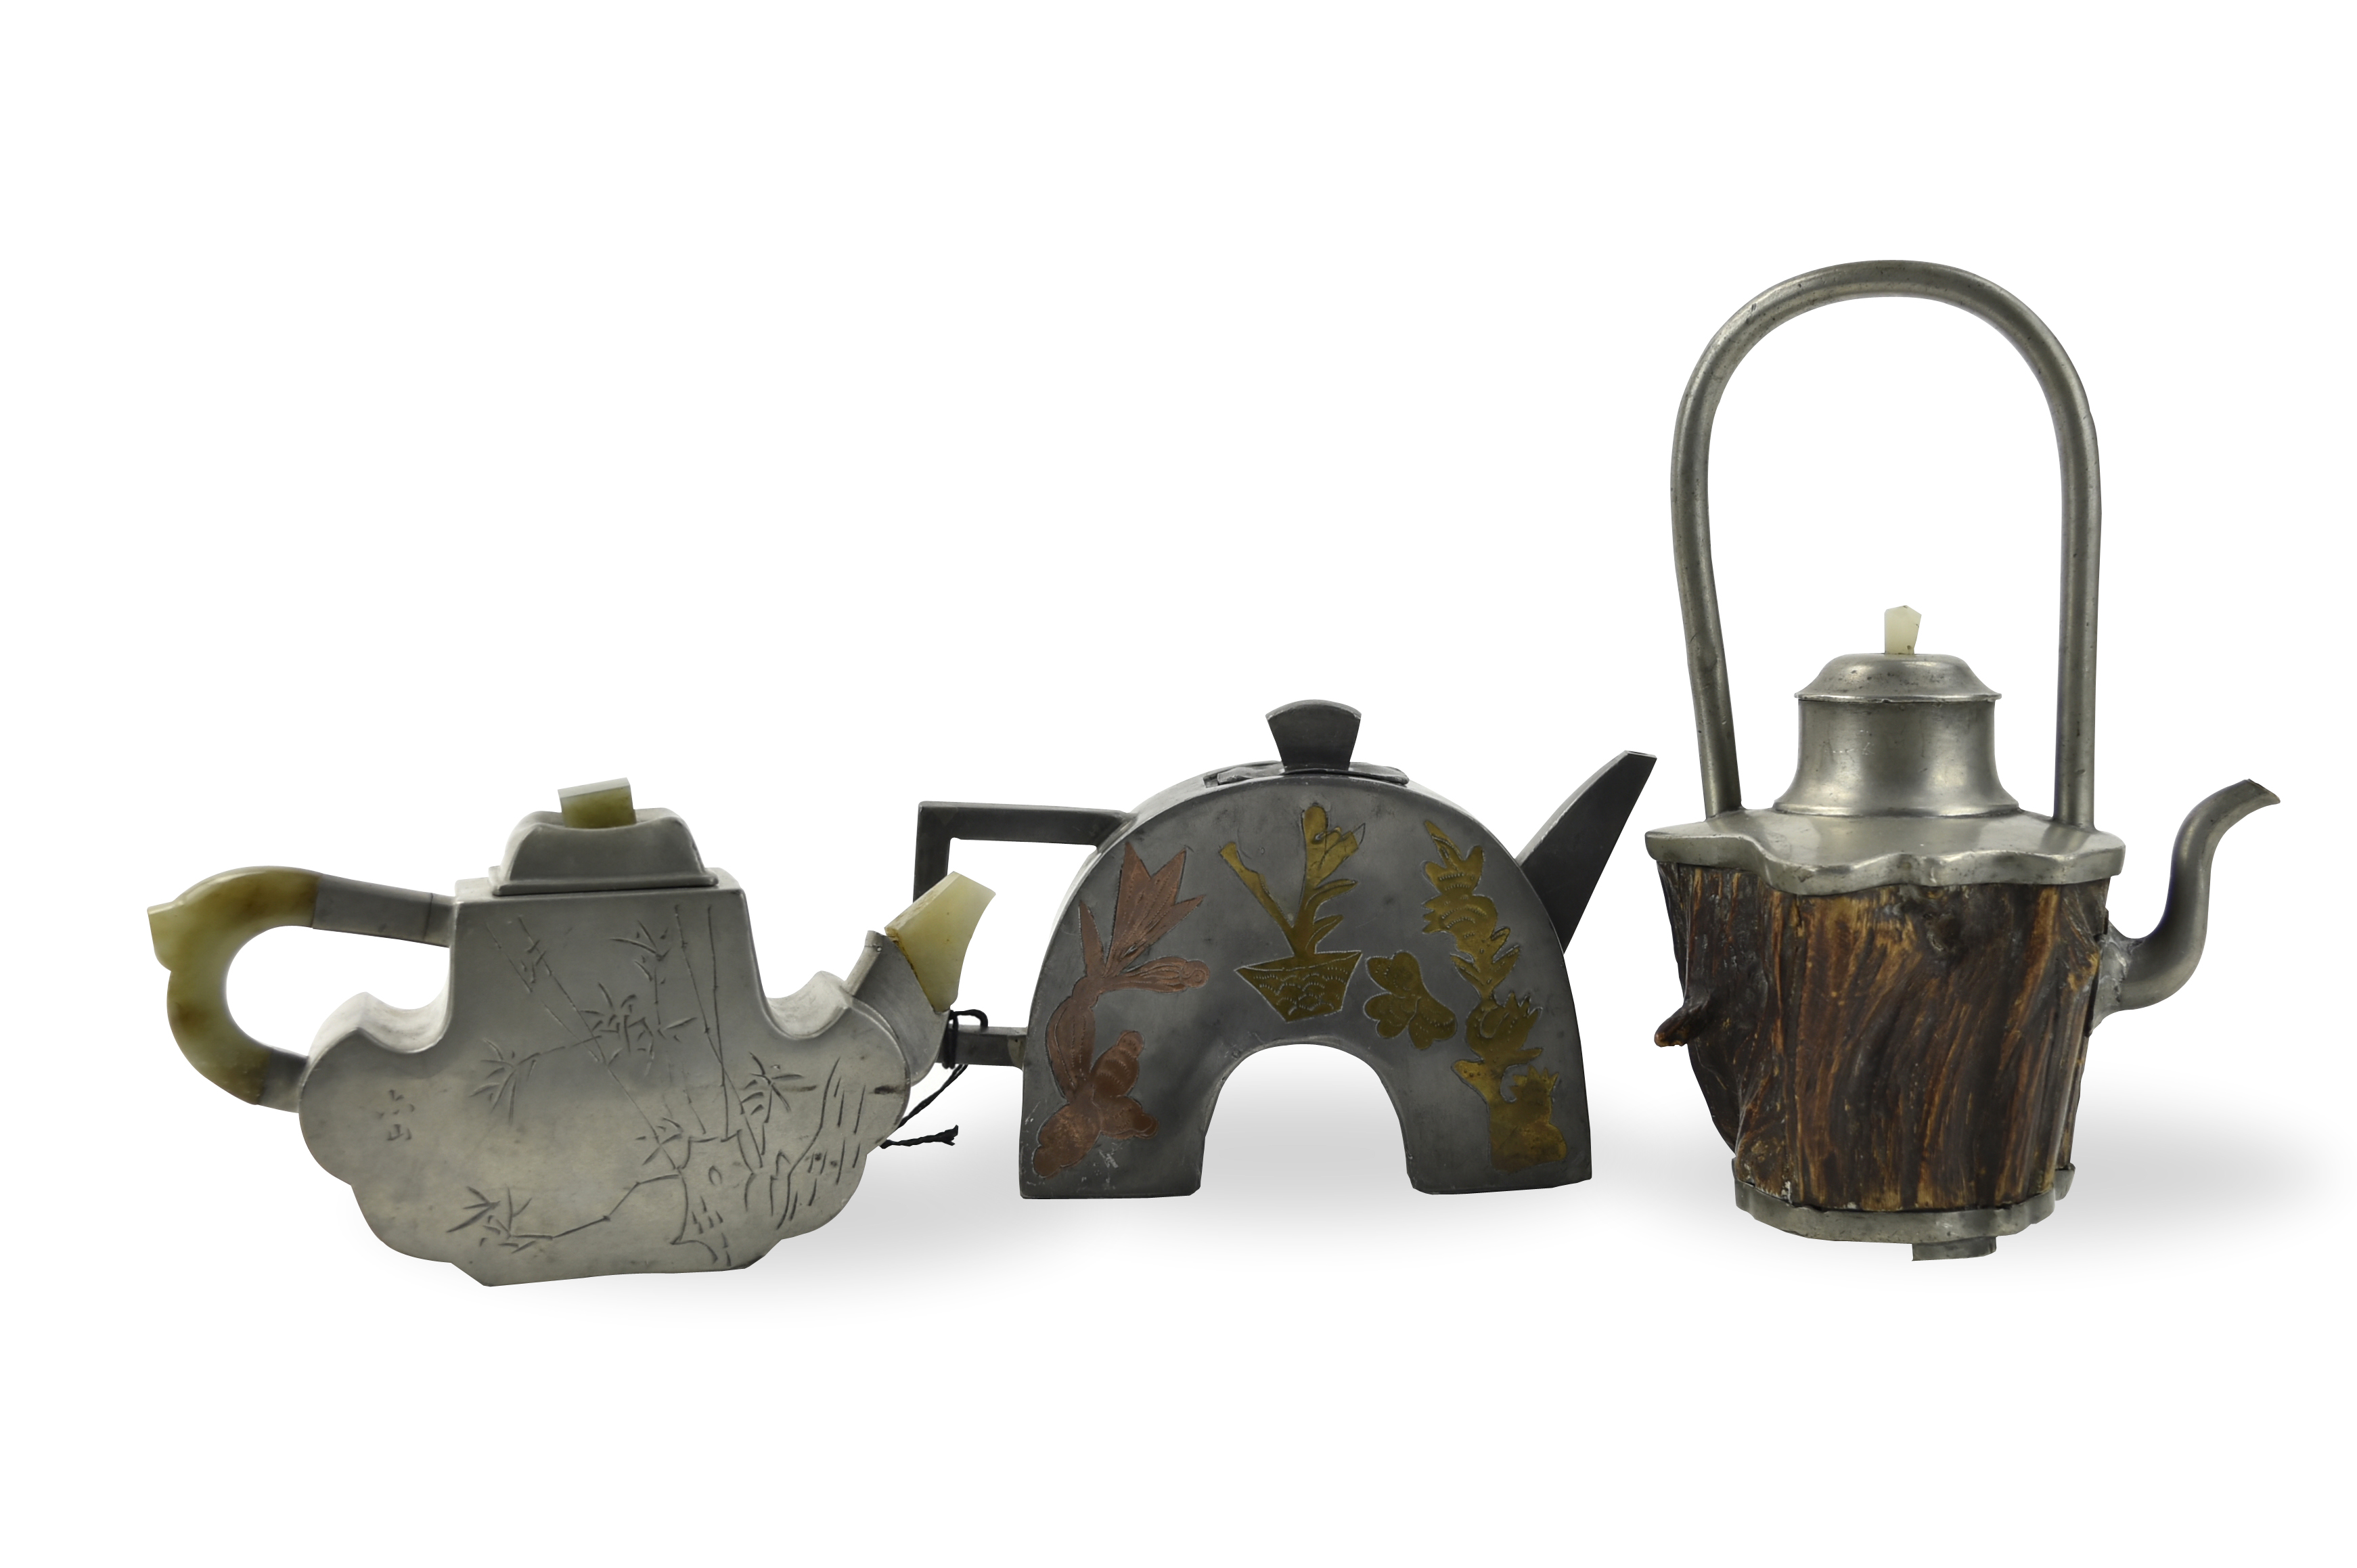 GROUP OF 3 PEWTER TEAPOT AND COVERS QING 33926e